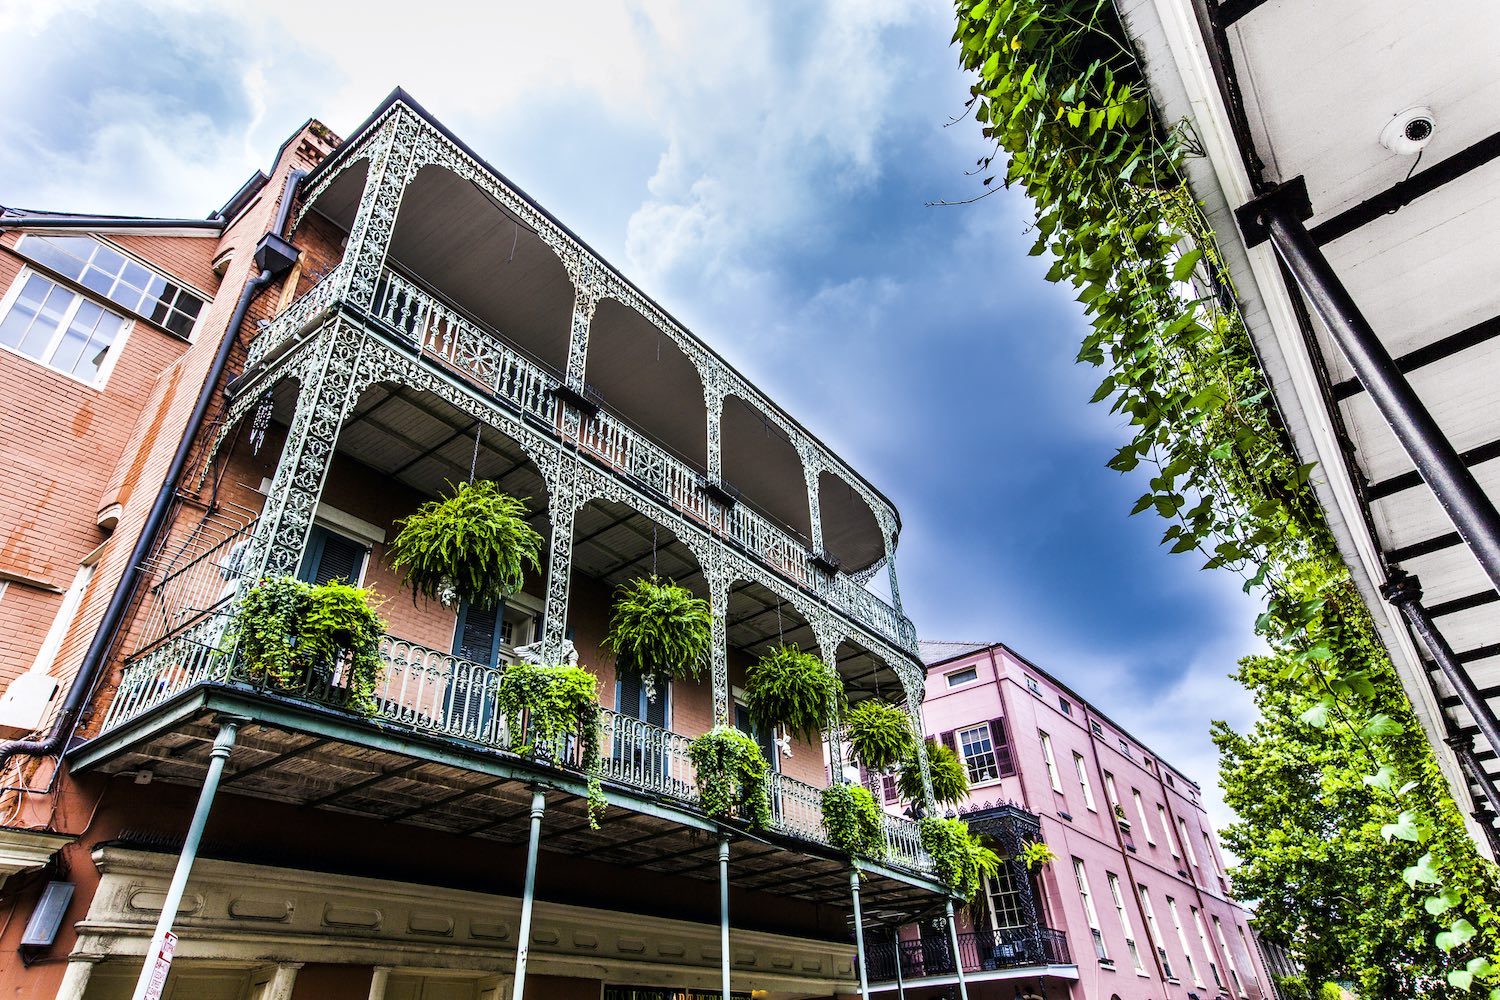 13 Coolest Best Airbnbs In New Orleans Usa 2020